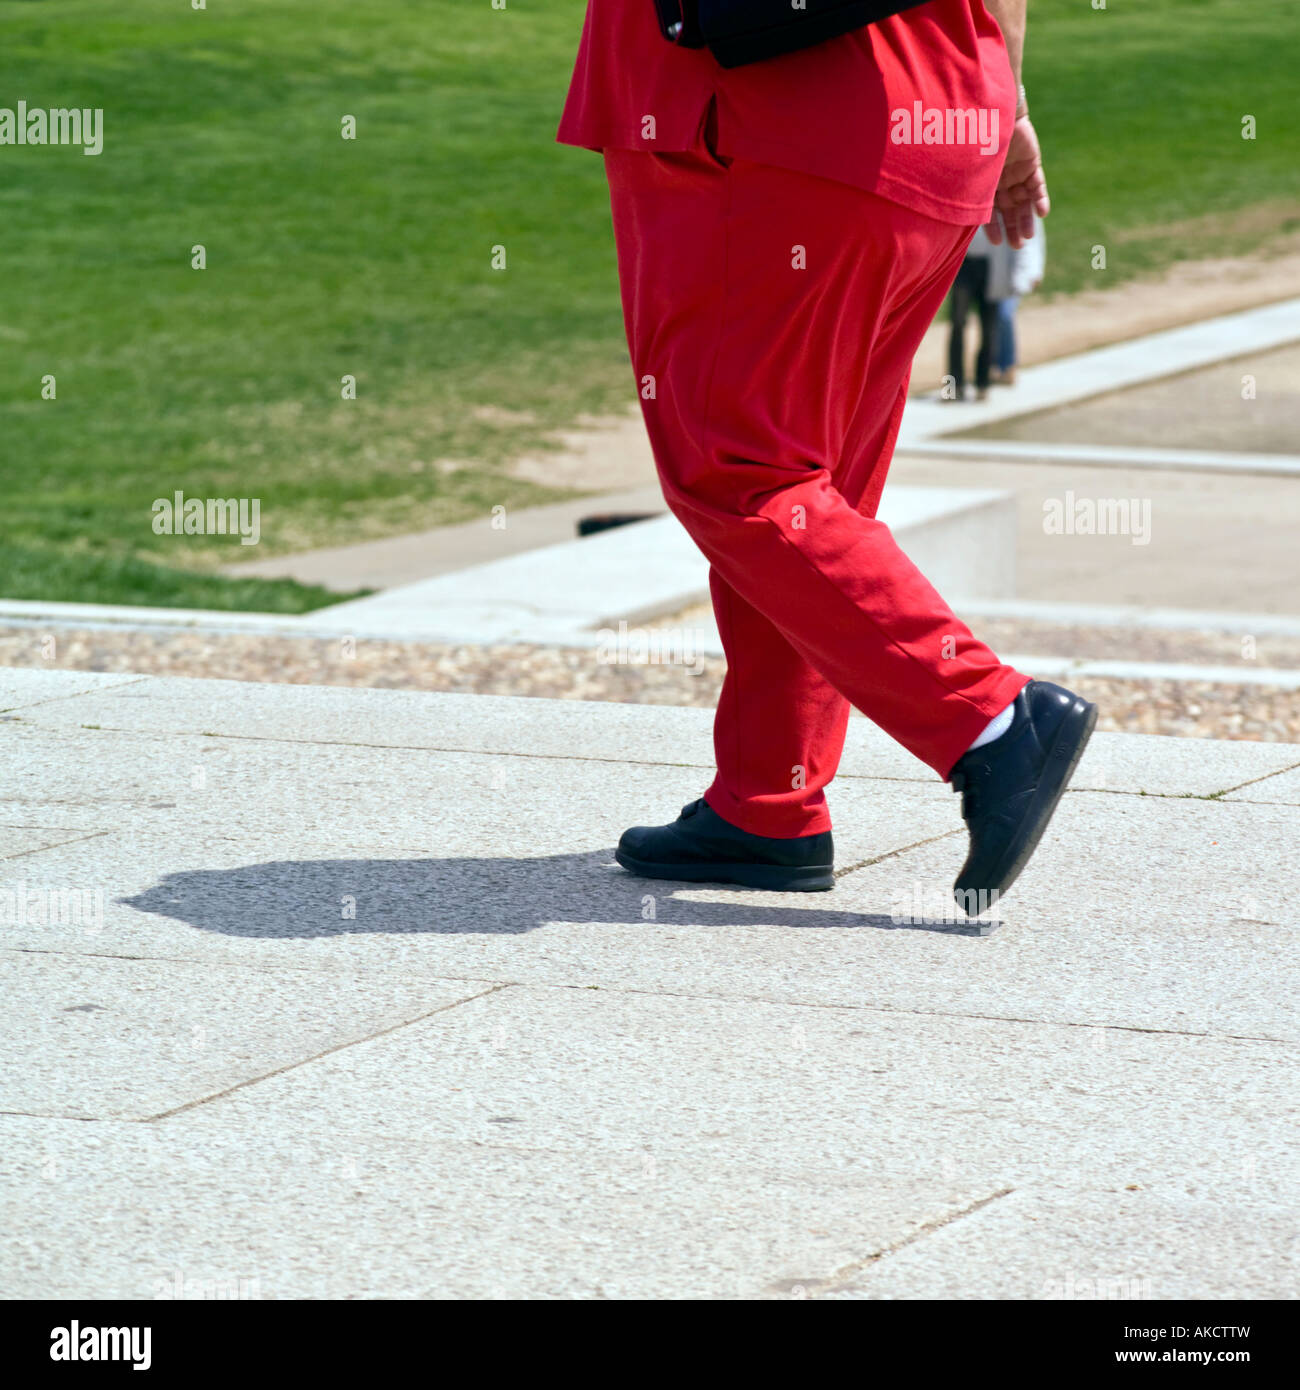 Overweight woman wearing a red pantsuit and black shoes casts a small shadow as she walks on sidewalk Stock Photo